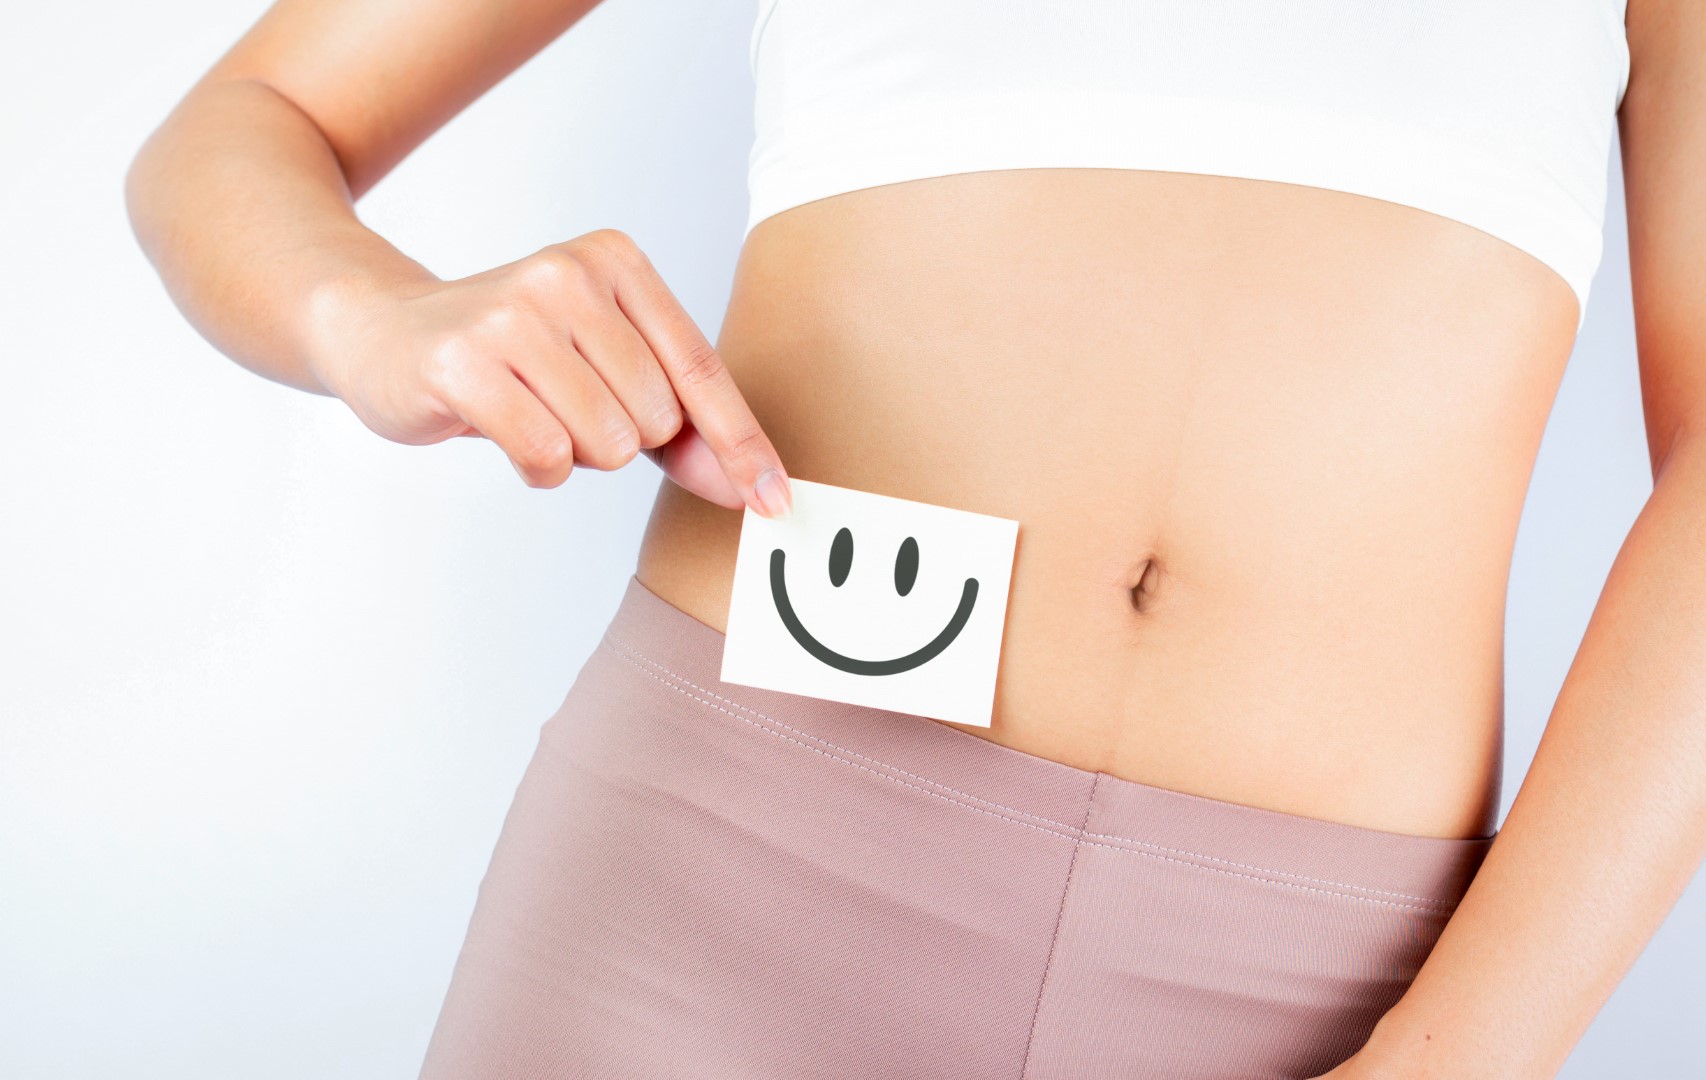 healthy gut has positive impact on weight loss